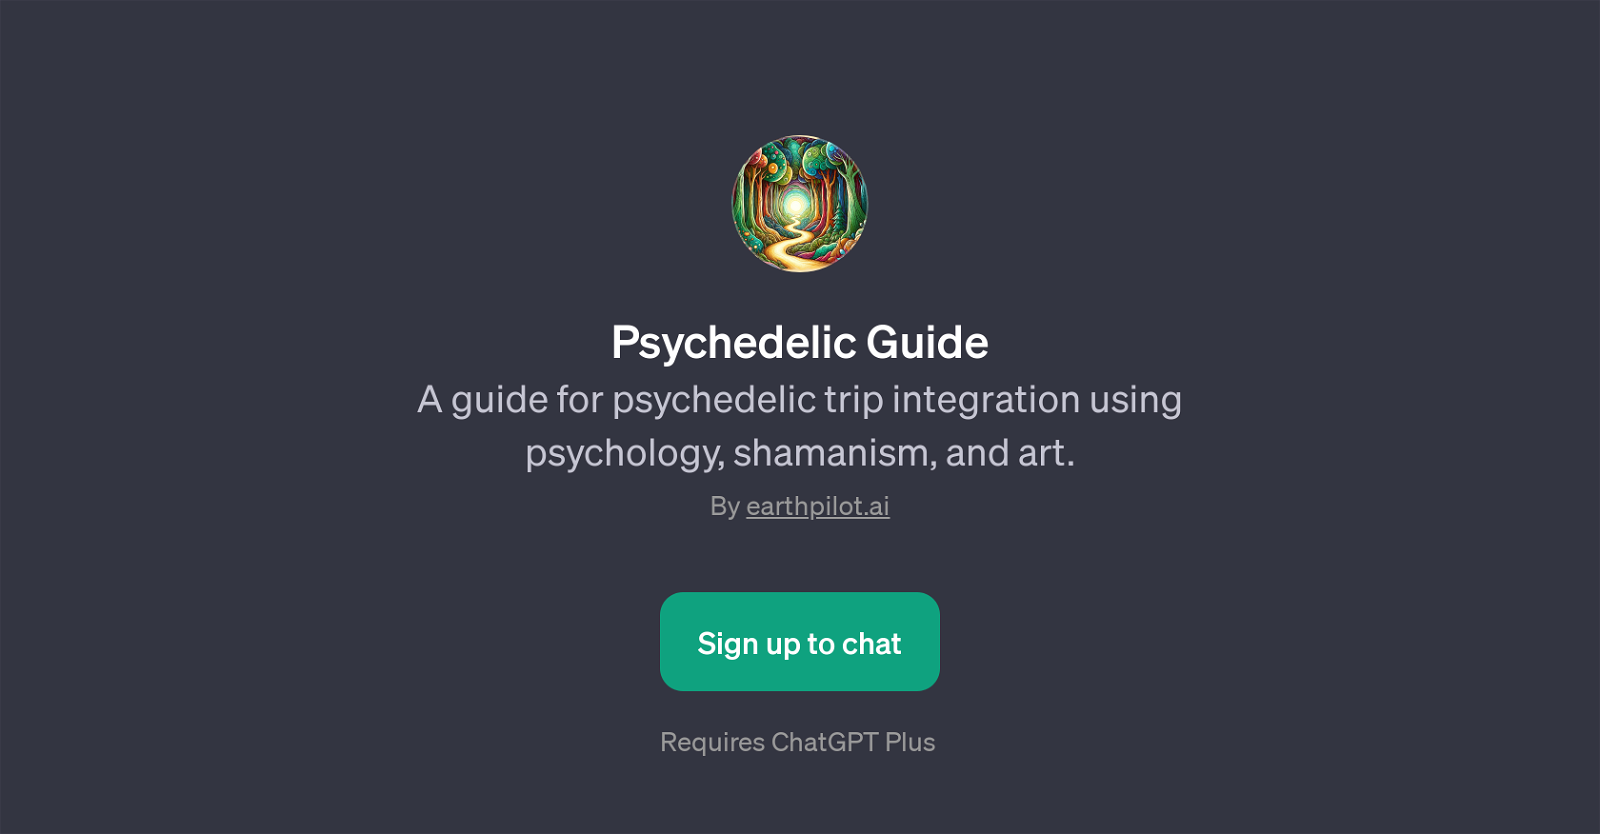 Psychedelic Guide website